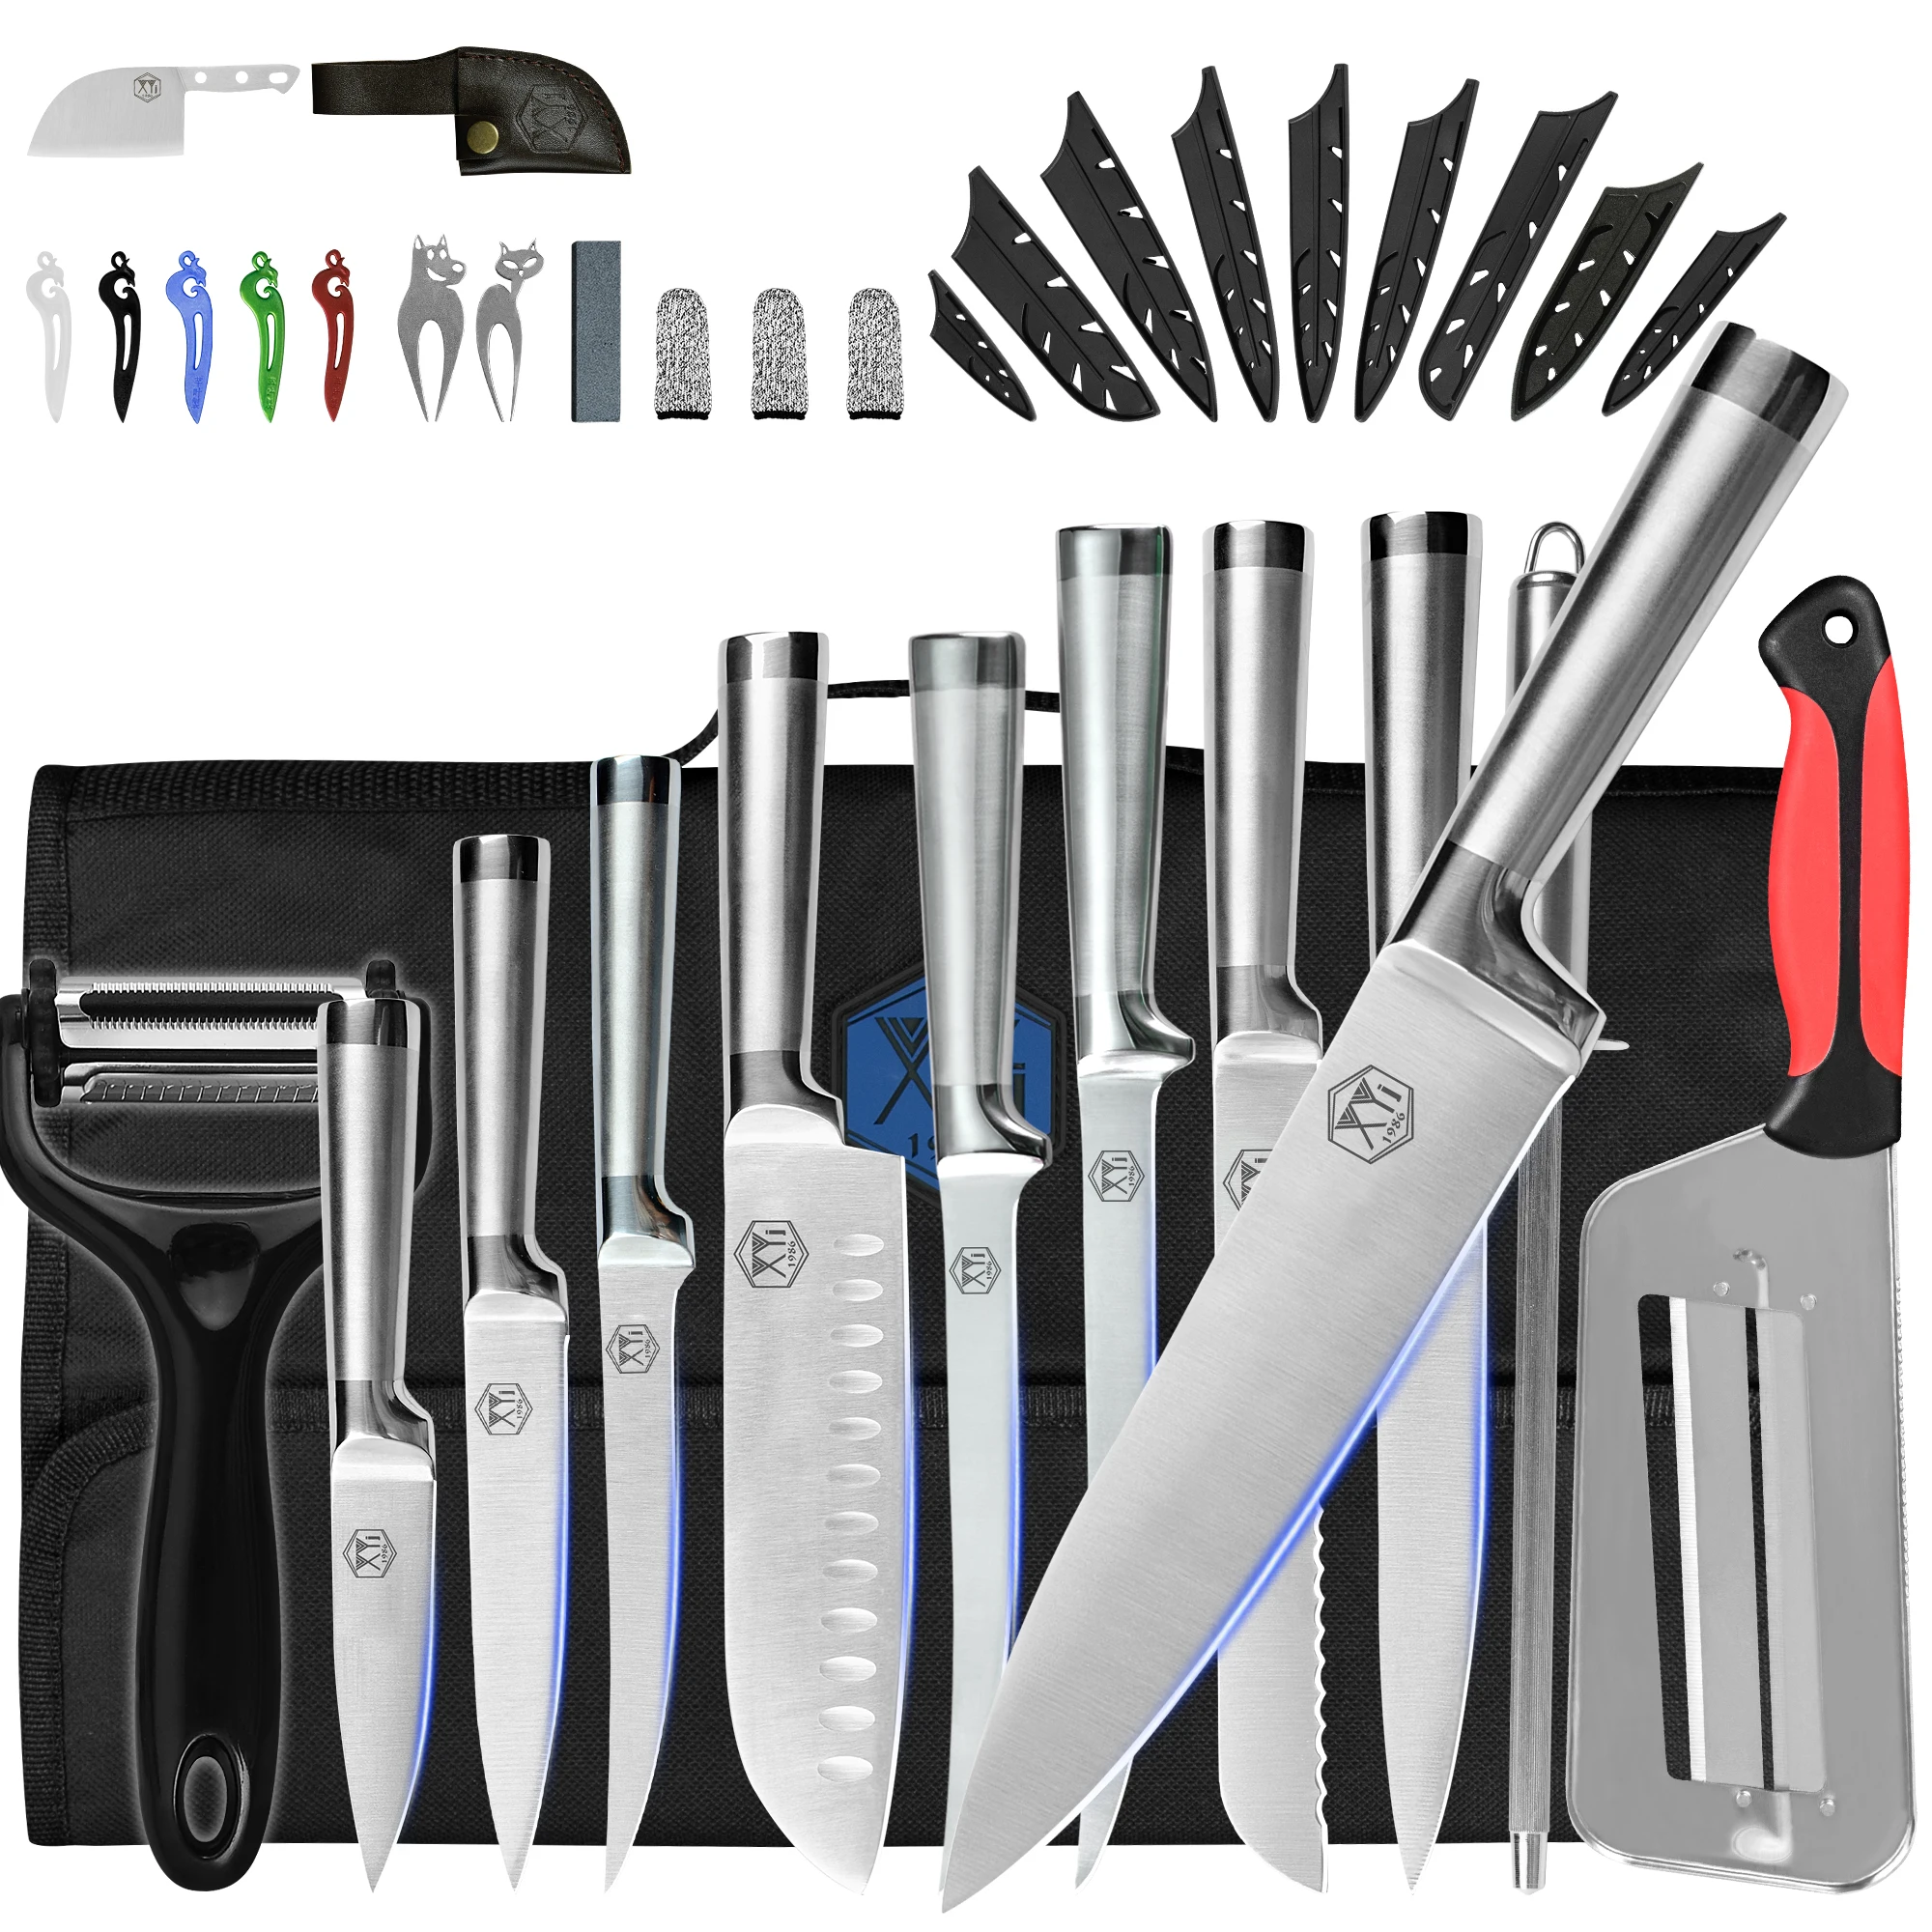 

Knives Tool Kit Stainless Steel Chef Slicing Bread Santoku Fish Boning Utility Paring Knife Set Gift Kitchen Utensil Accessories